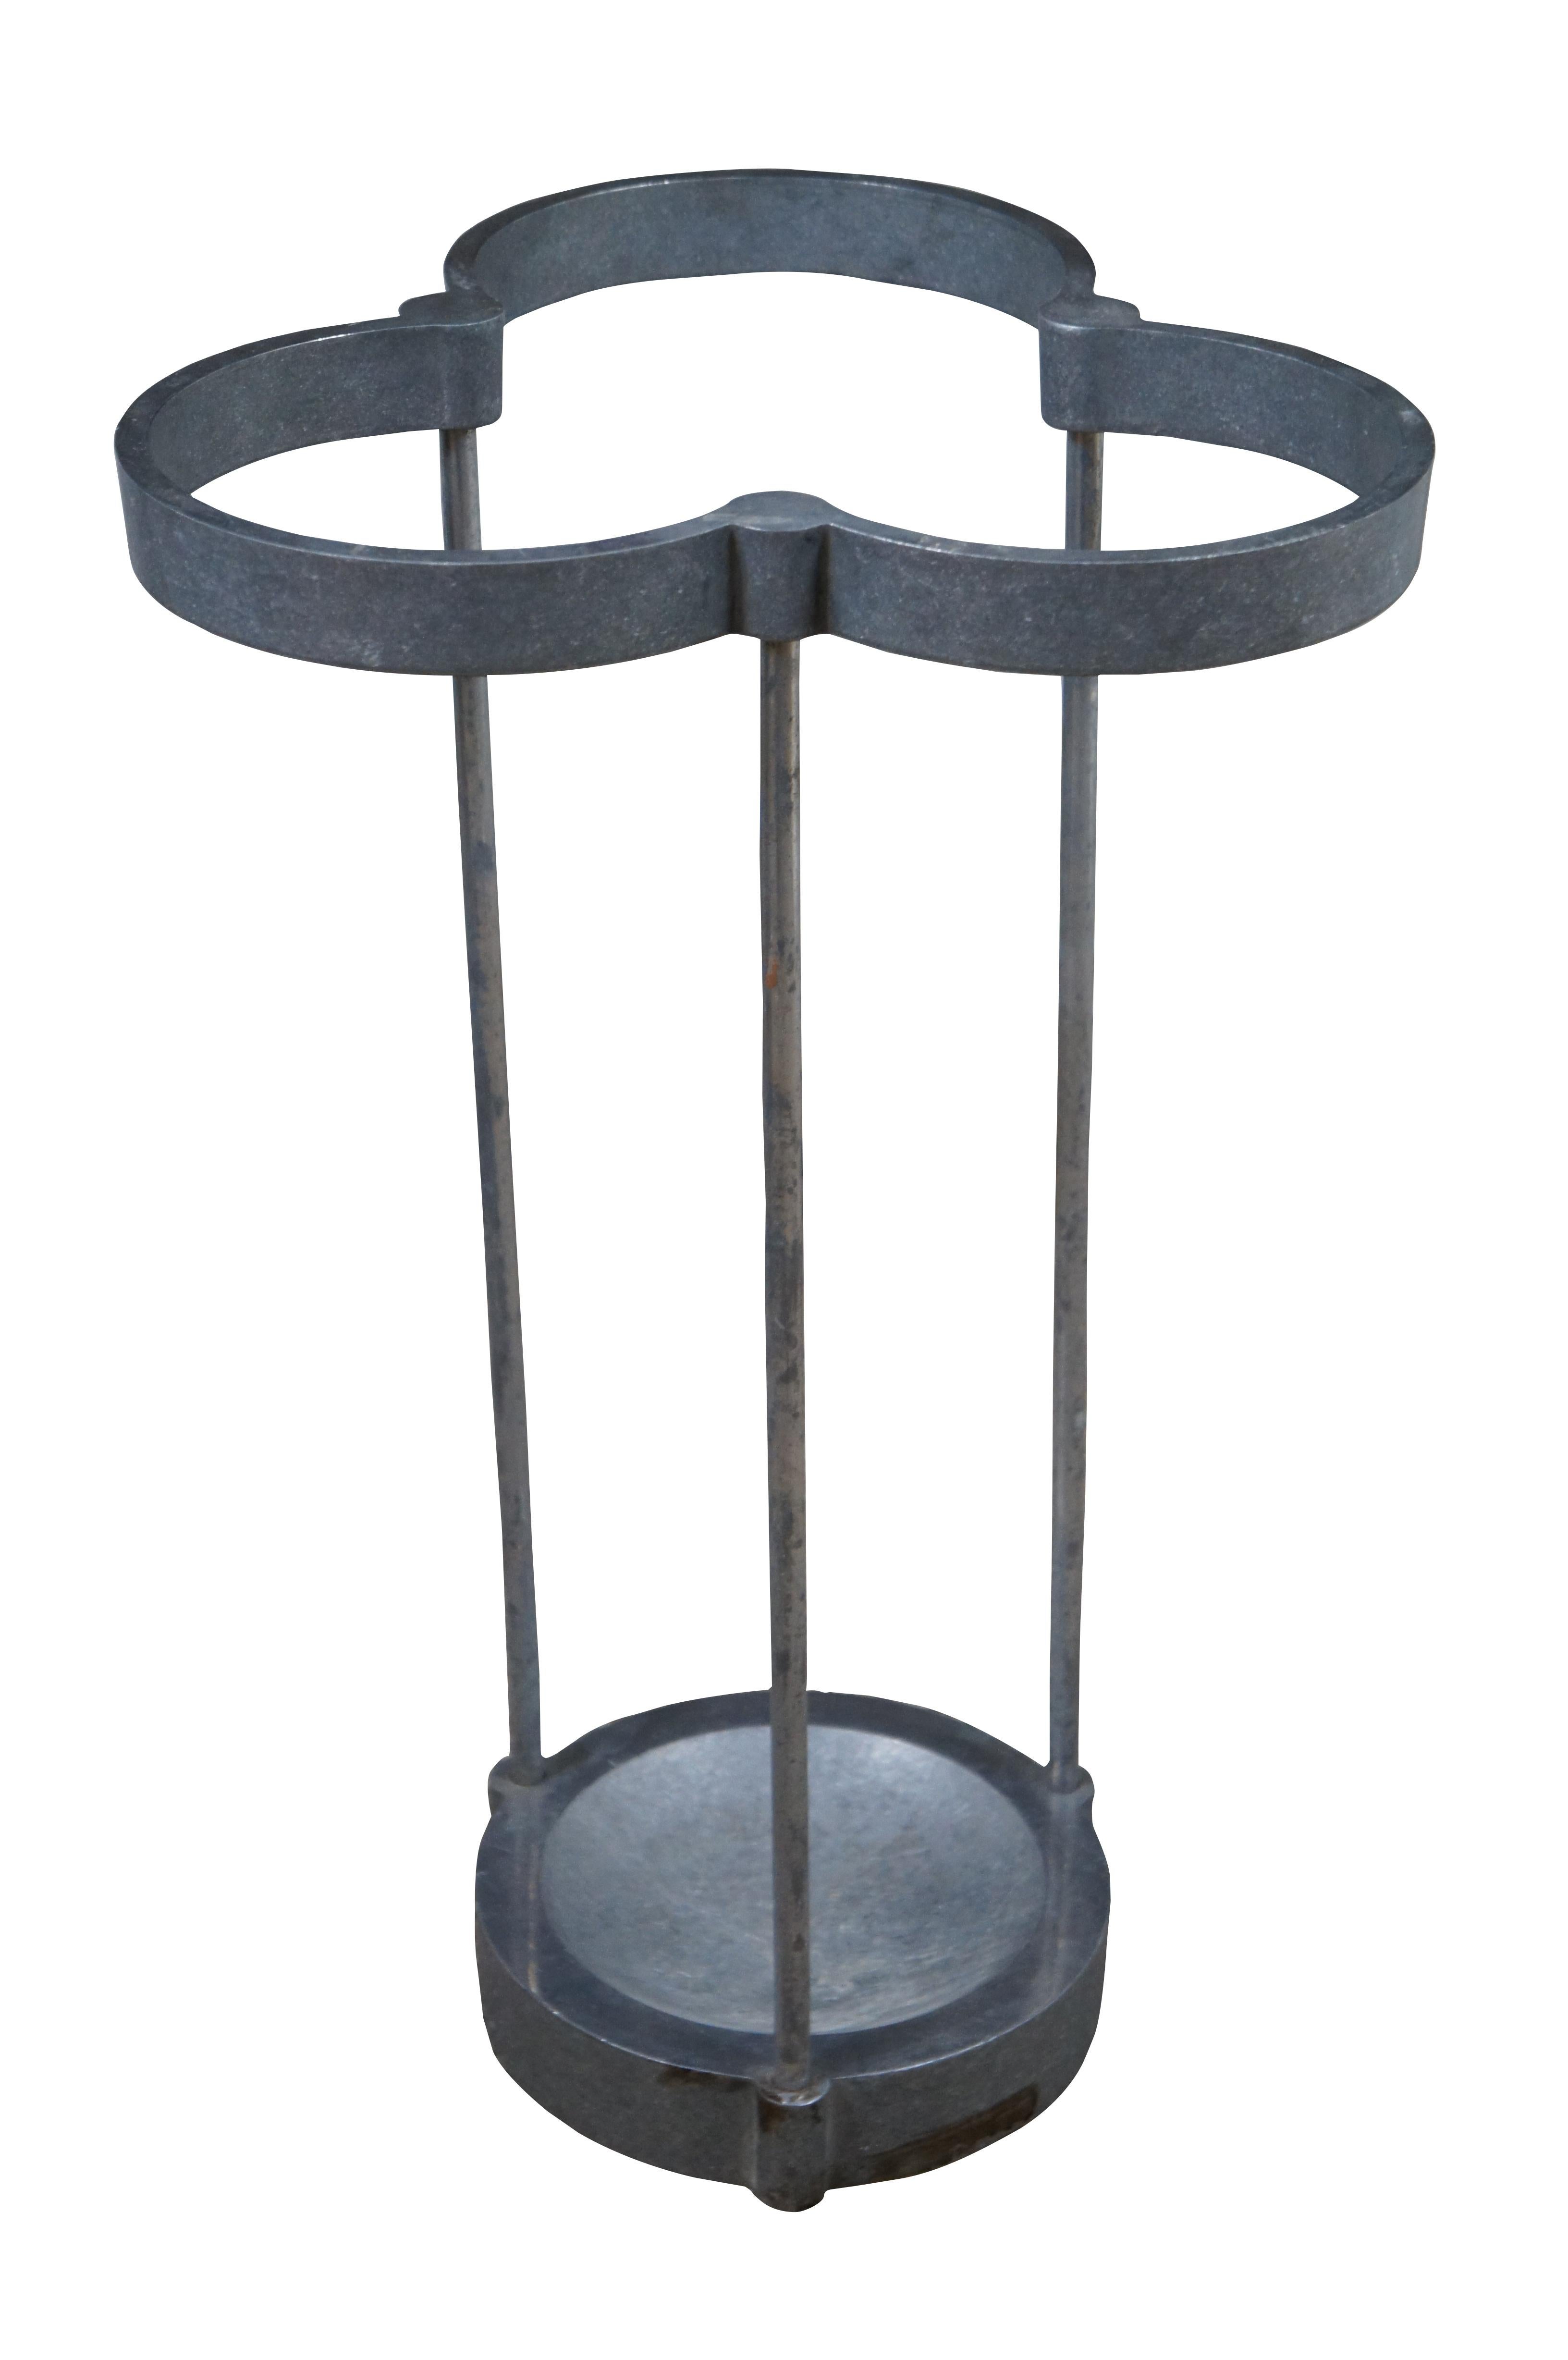 Vintage Modern 1991 recycled aluminum post modern style umbrella or cane stand featuring a trefoil or clover shaped upper rim and a round base. Produced by EFM Designs for the Museum of Modern Art, designed by Emanuela Frattini Magnusson & Carl